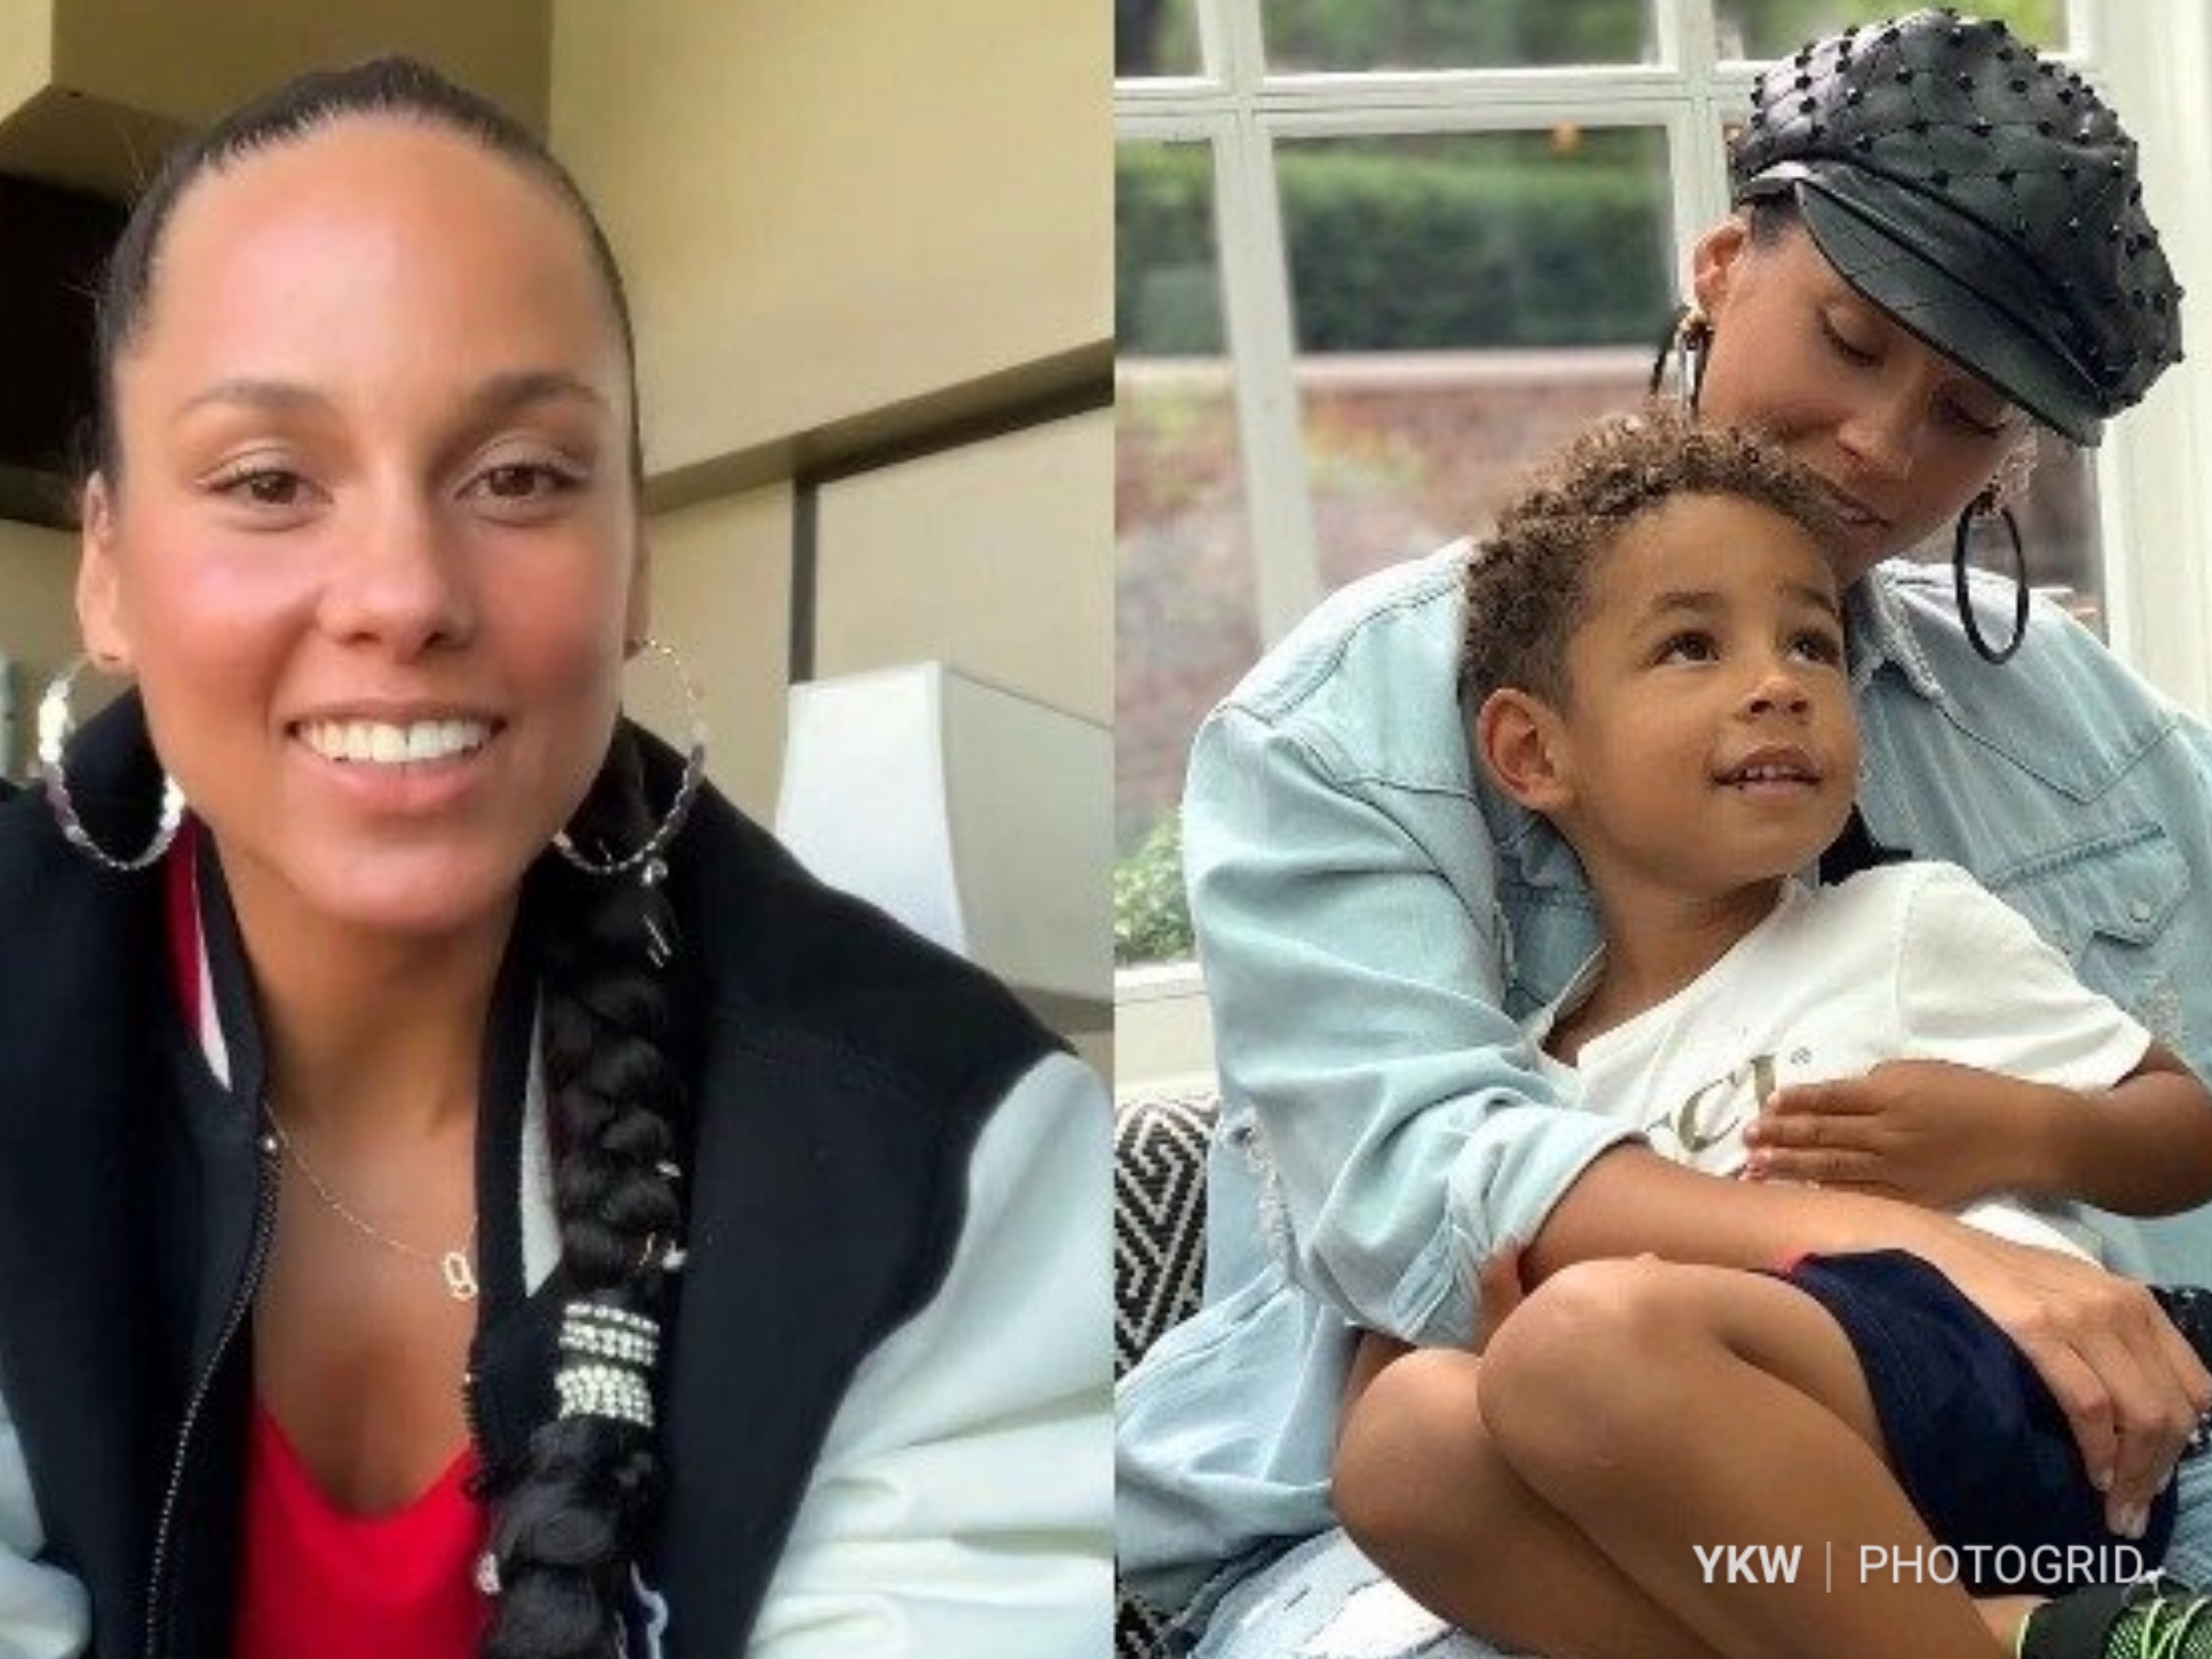 Alicia Keys Says Her 4-Year Old Son Worried People Will Judge His Rainbow Nail Polish